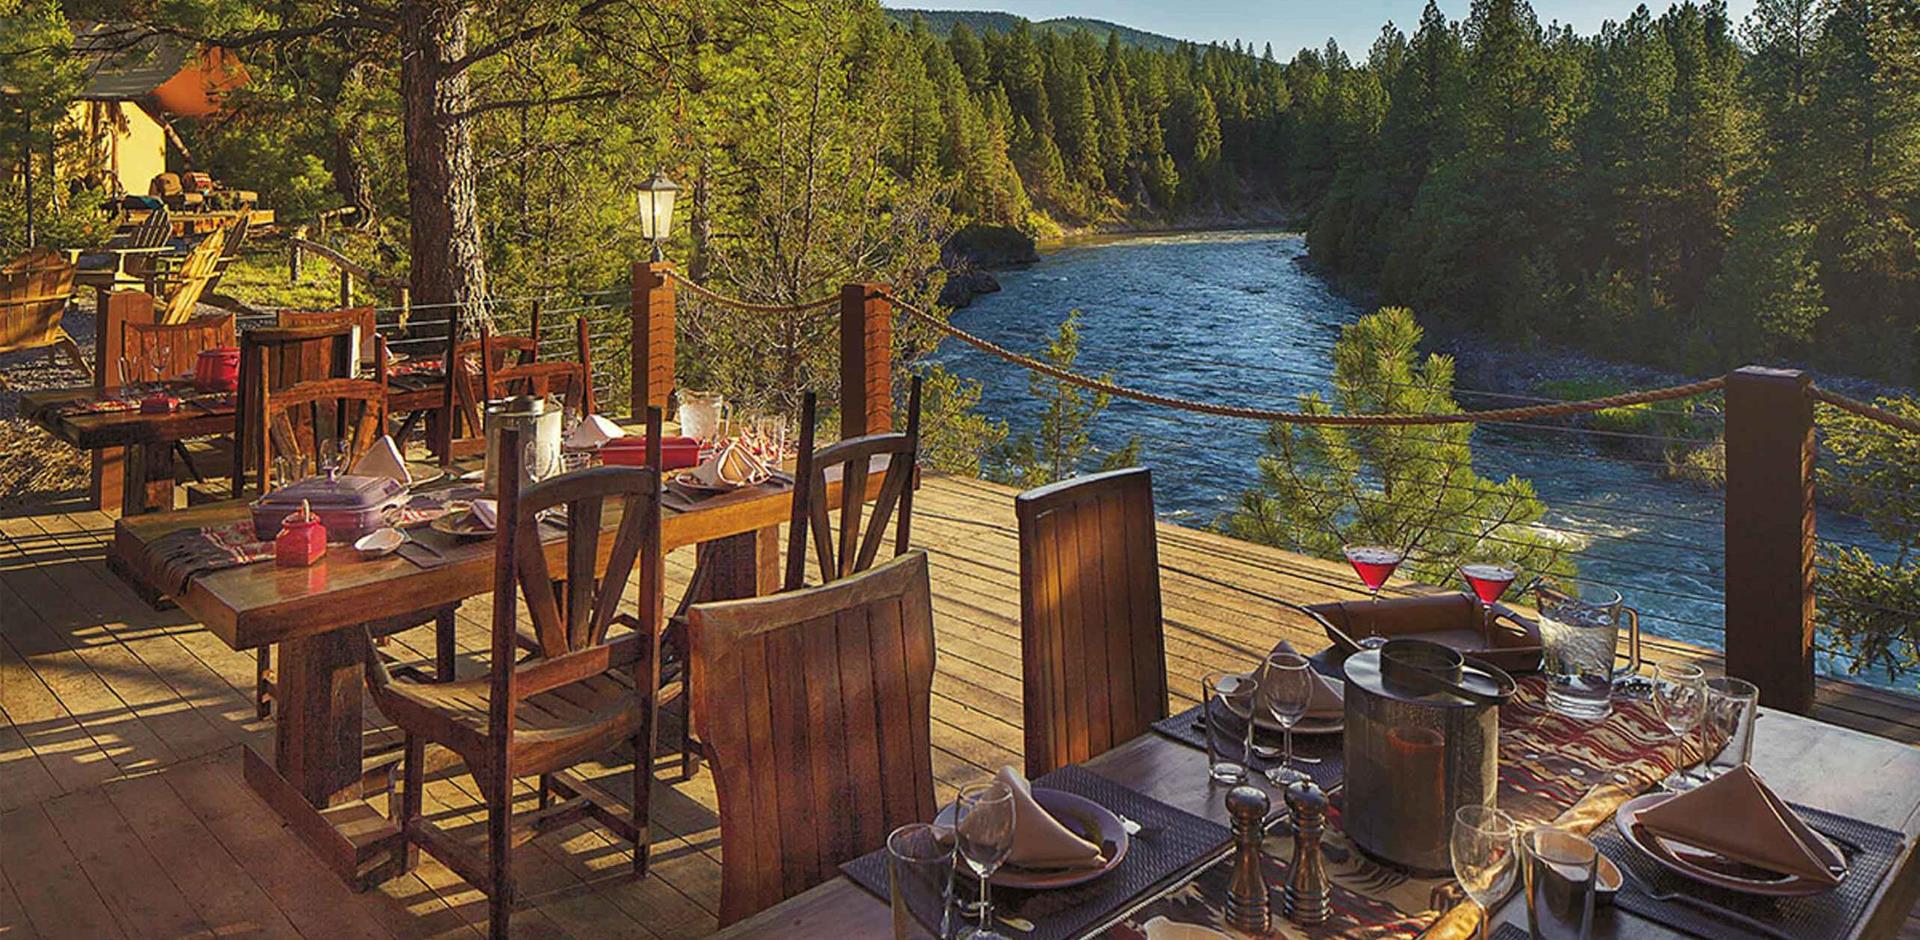 Cliffside camp restaurant with river view, The Resort at Paws Up, Colorado, USA